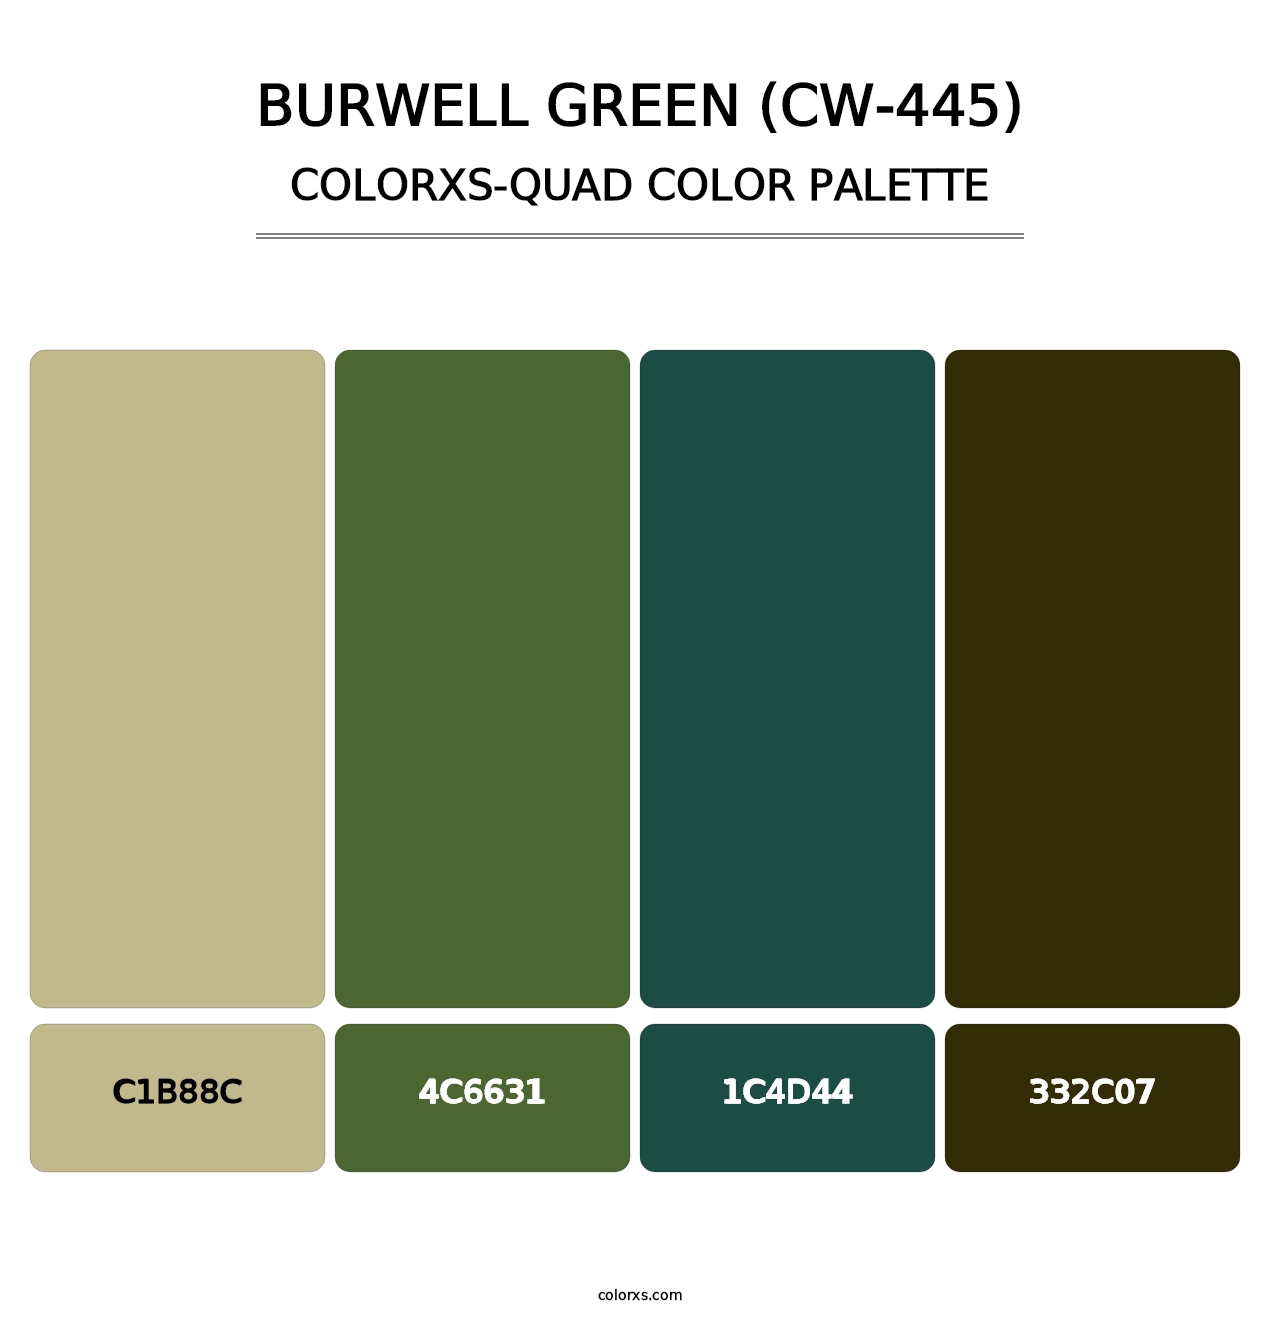 Burwell Green (CW-445) - Colorxs Quad Palette